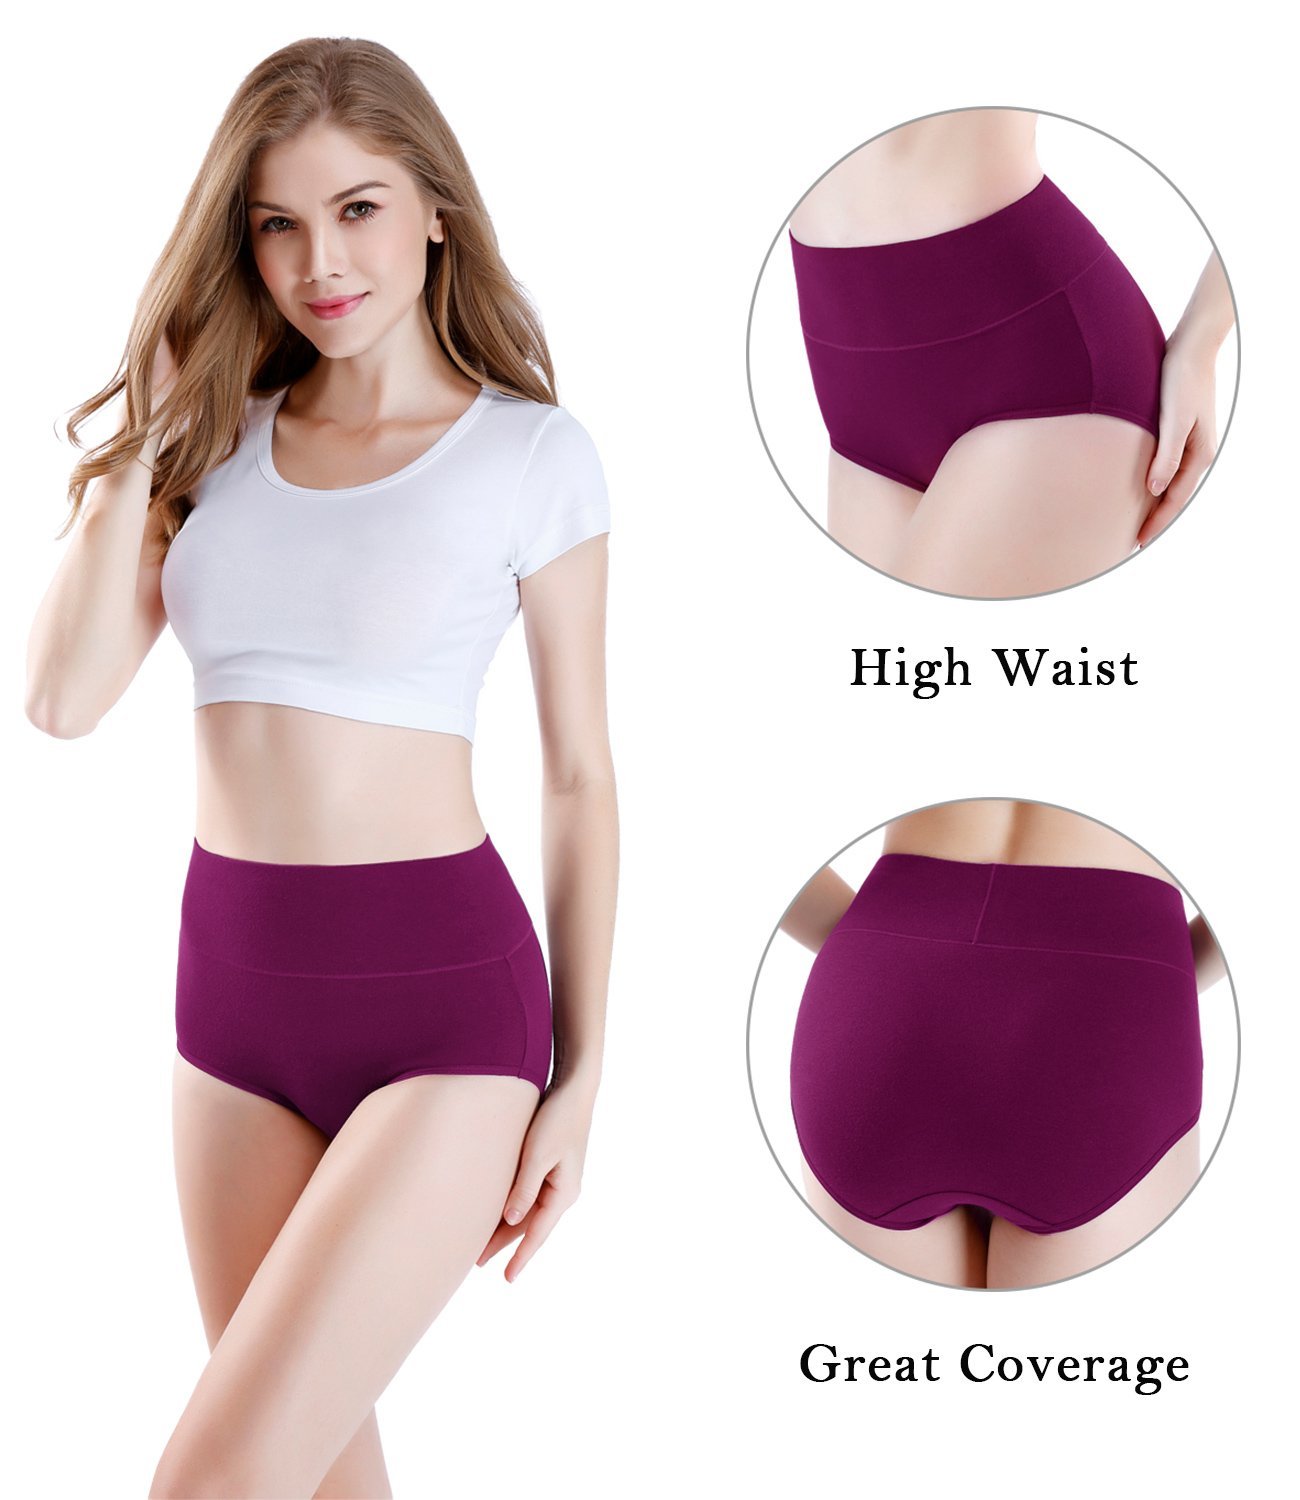 Wirarpa wirarpa Women's Cotton Underwear High Waist Briefs Full Coverage Panties  Ladies Comfortable Underpants 5 Pack Assorted Small